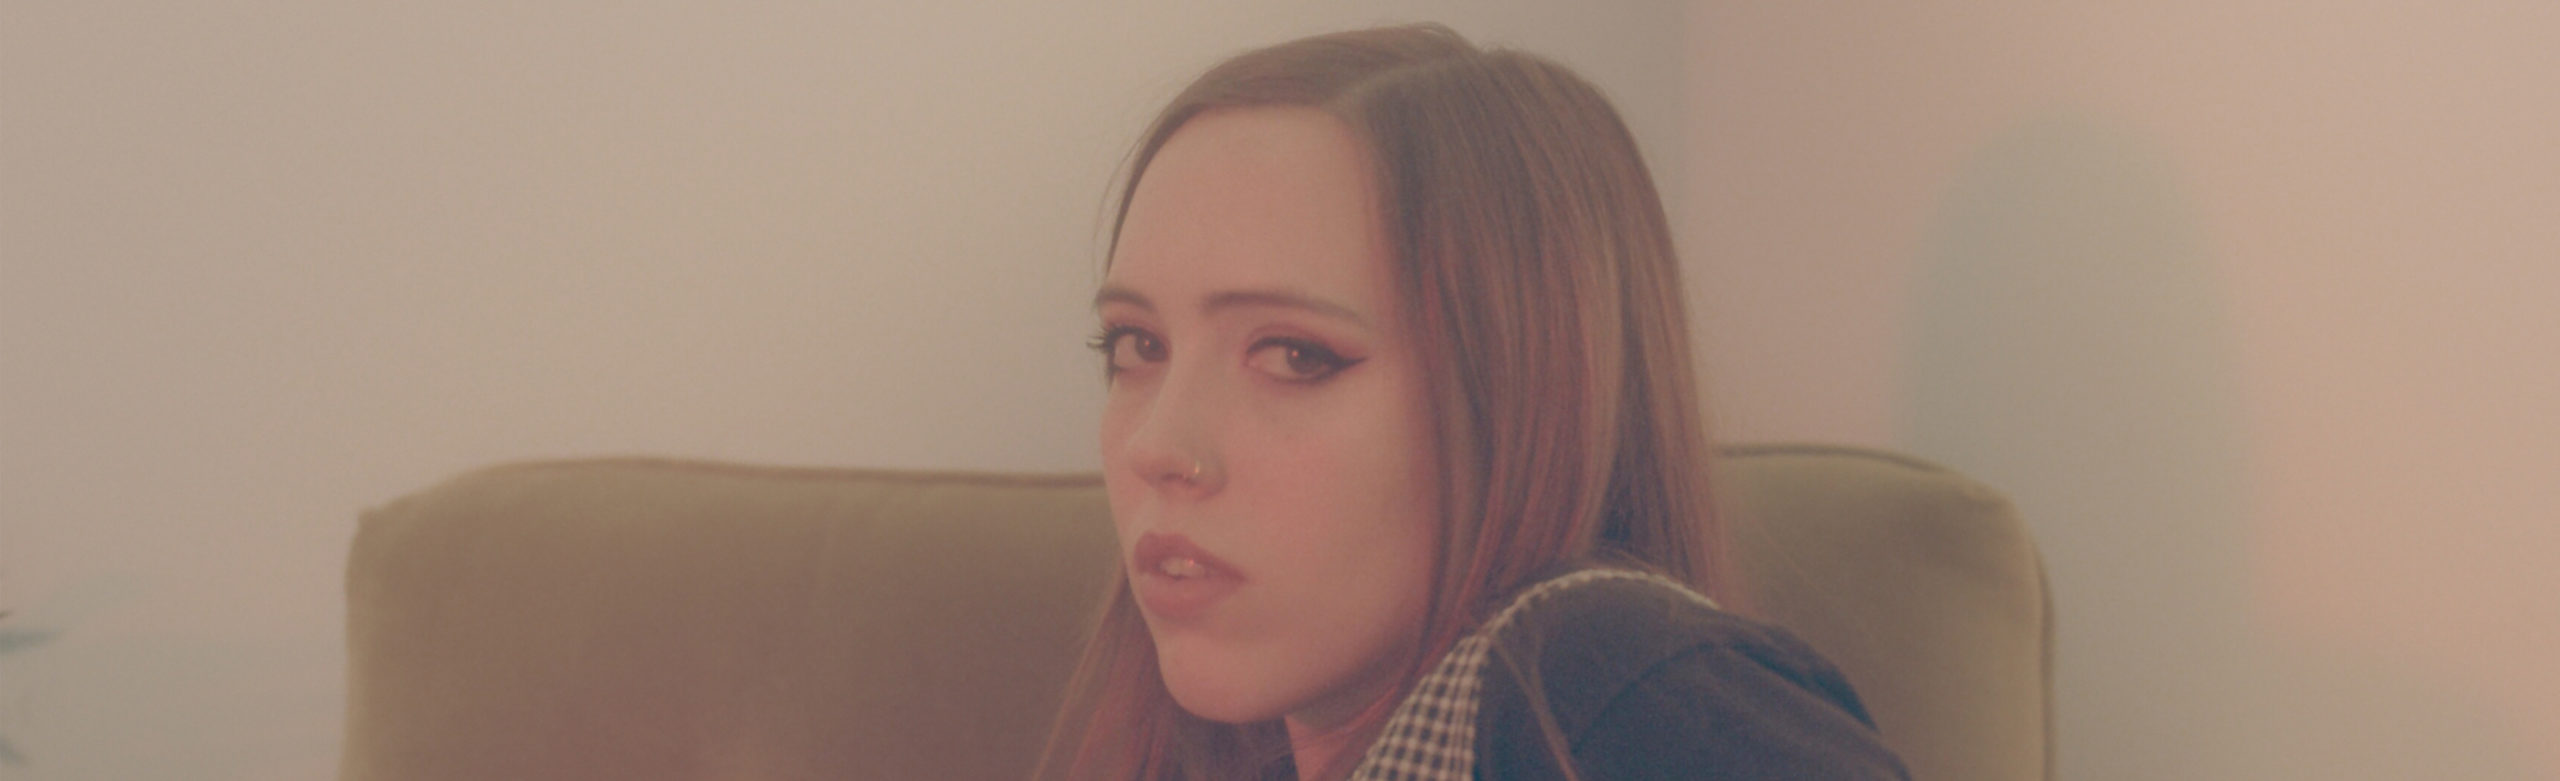 Wise Beyond Her Years: Indie Rocker Soccer Mommy Announces Concert in Missoula Image